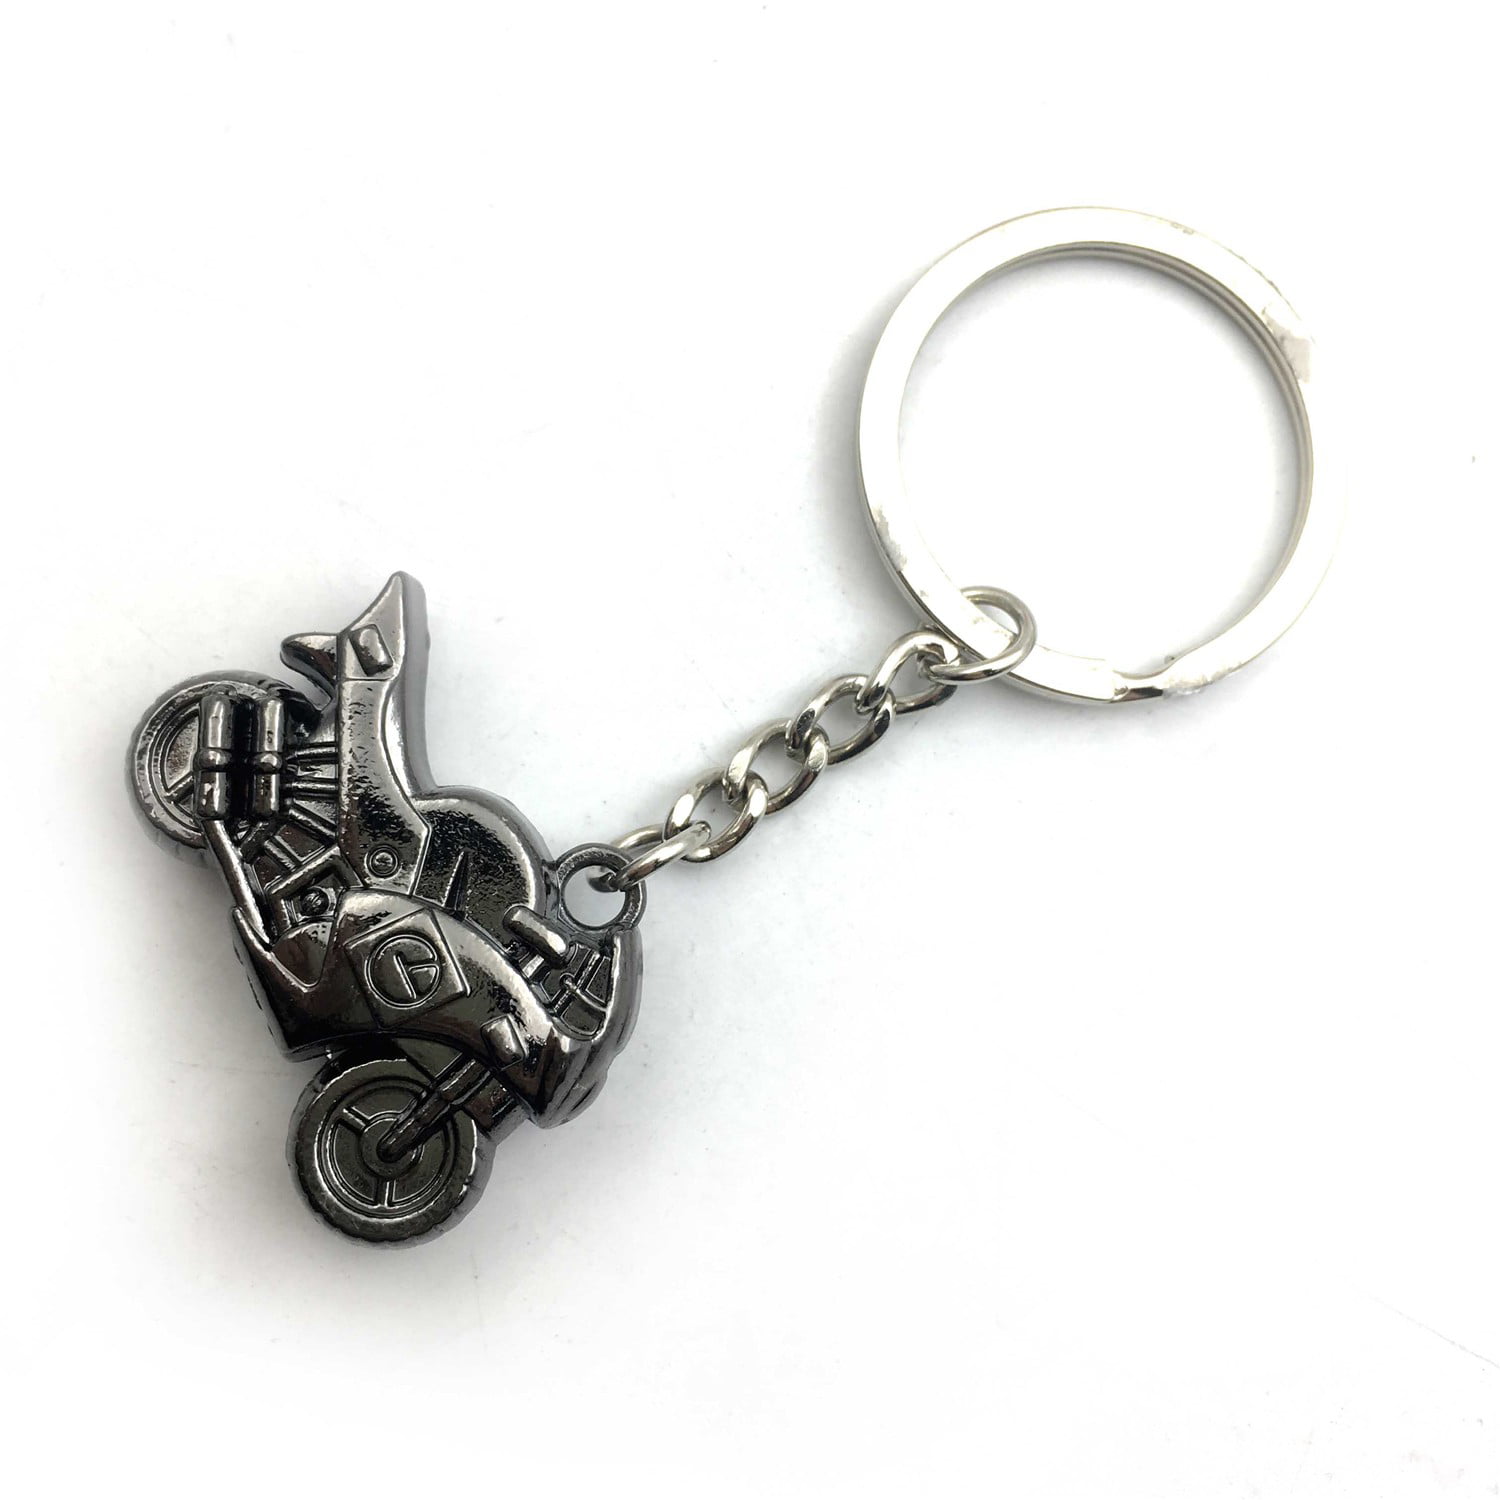 Details about   New Fashion Alloy Metal Keyfob Car Auto Keyring Keychain Key Chain Ring Gift Hot 